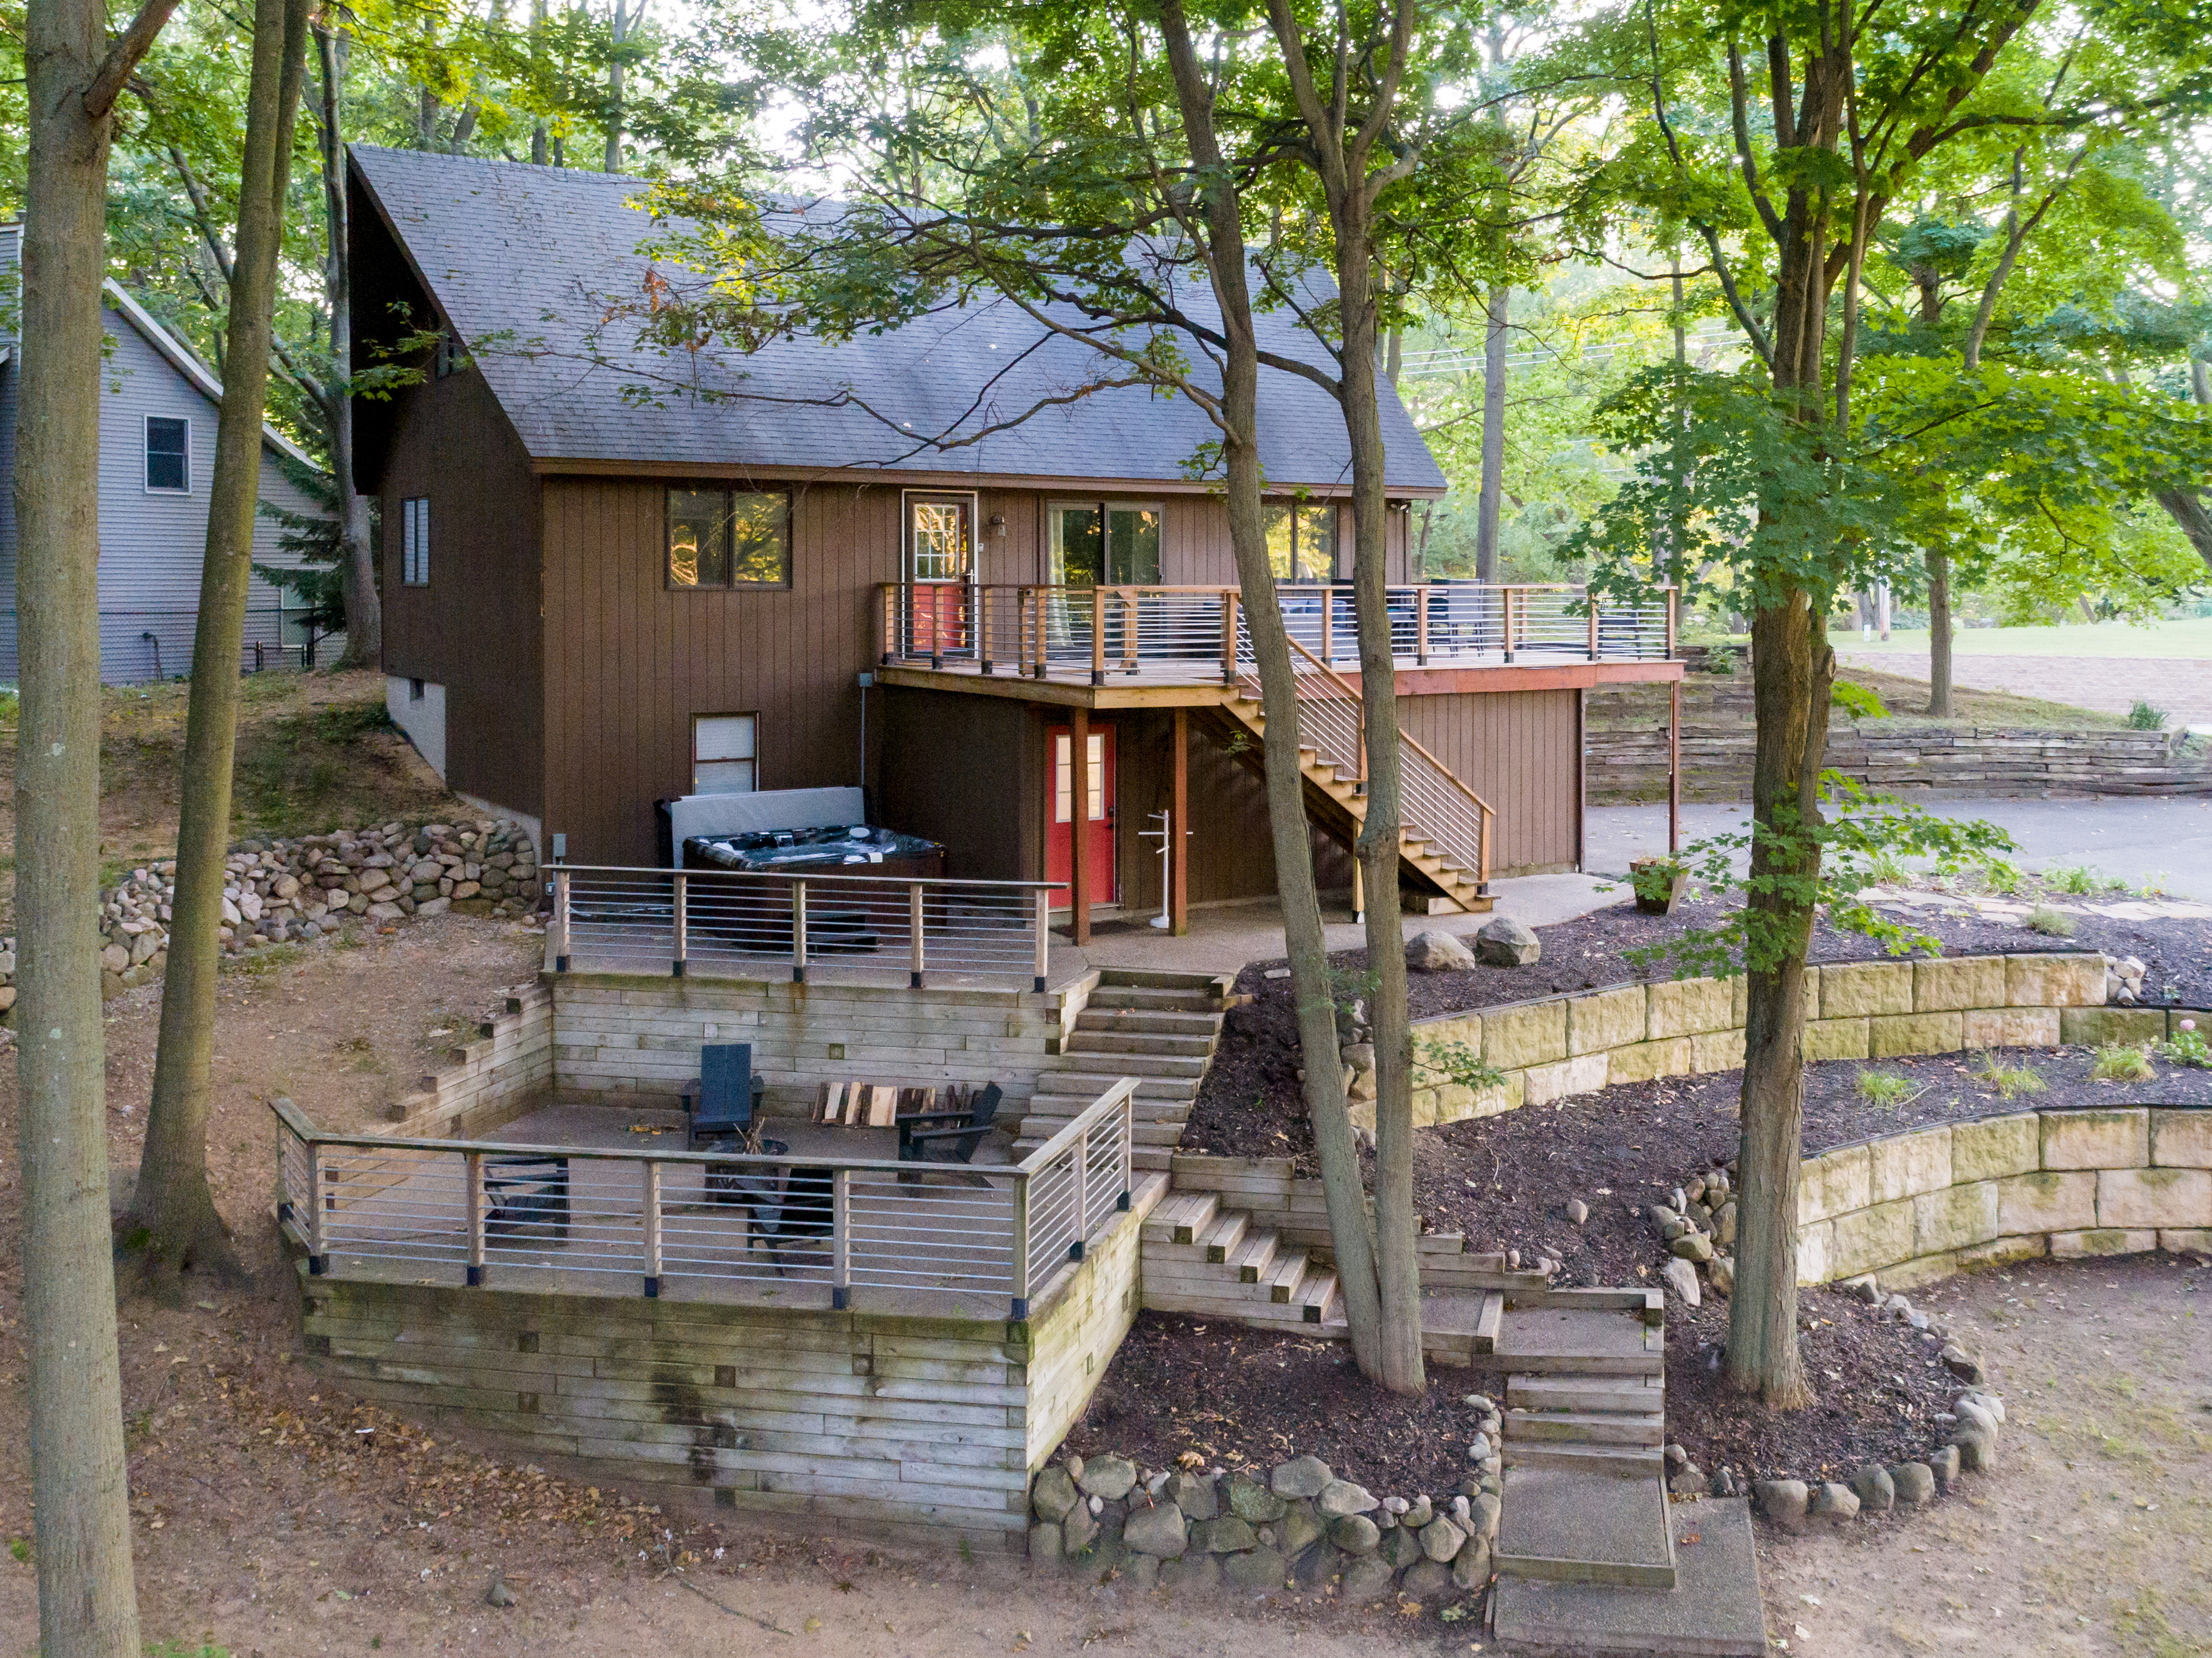 This three bedroom, two bathroom vacation rental home near Lake Michigan sleeps up to 10 guests.